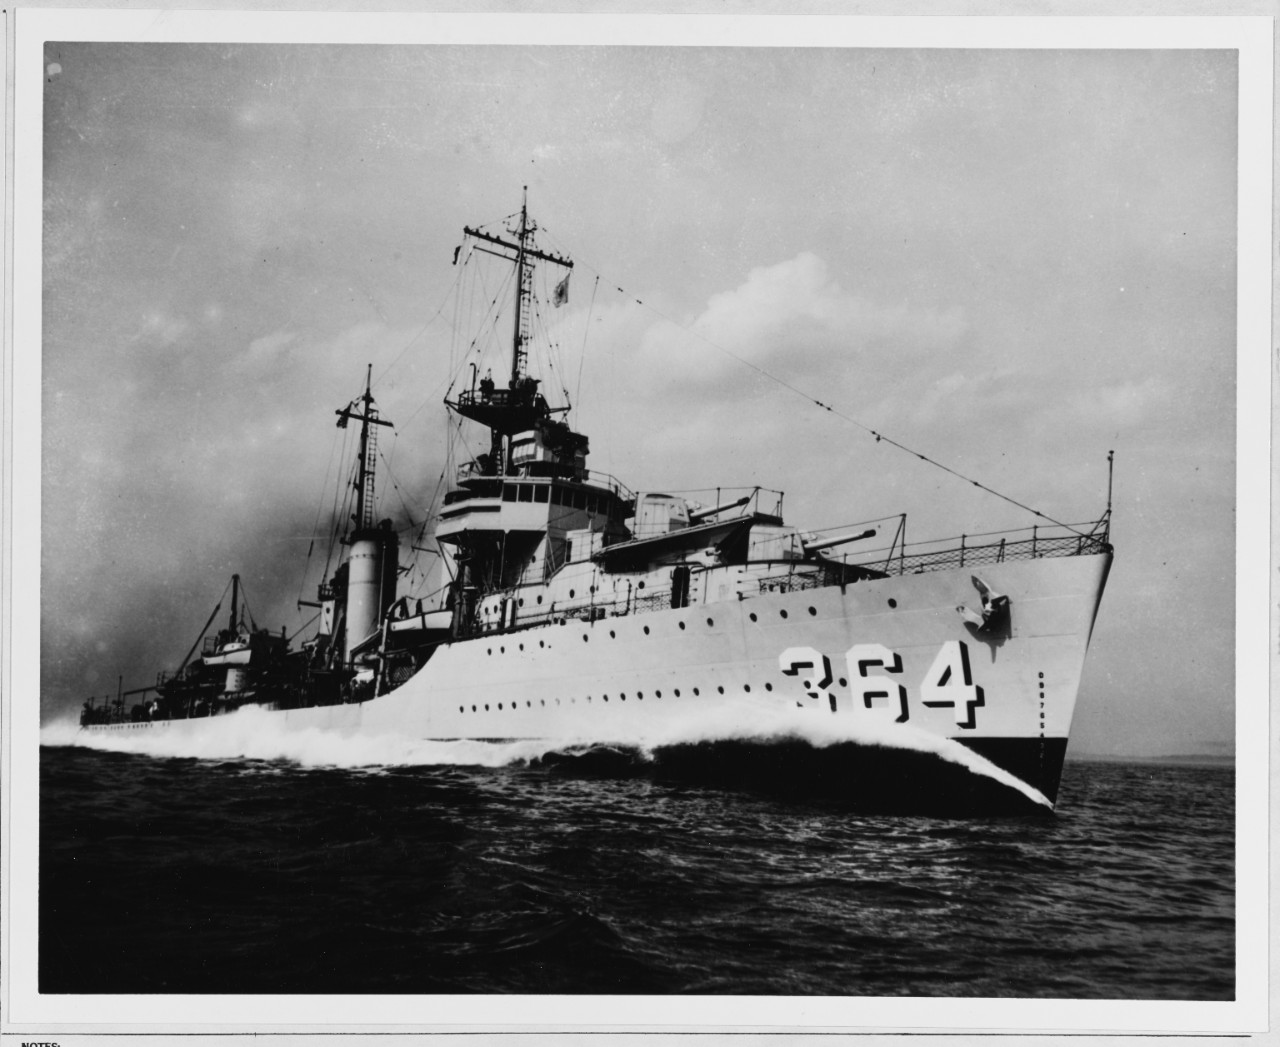 The newly commissioned destroyer conducting trials off the eastern seaboard of the U.S., circa 1936. (Naval History and Heritage Command Photograph NH 60643)